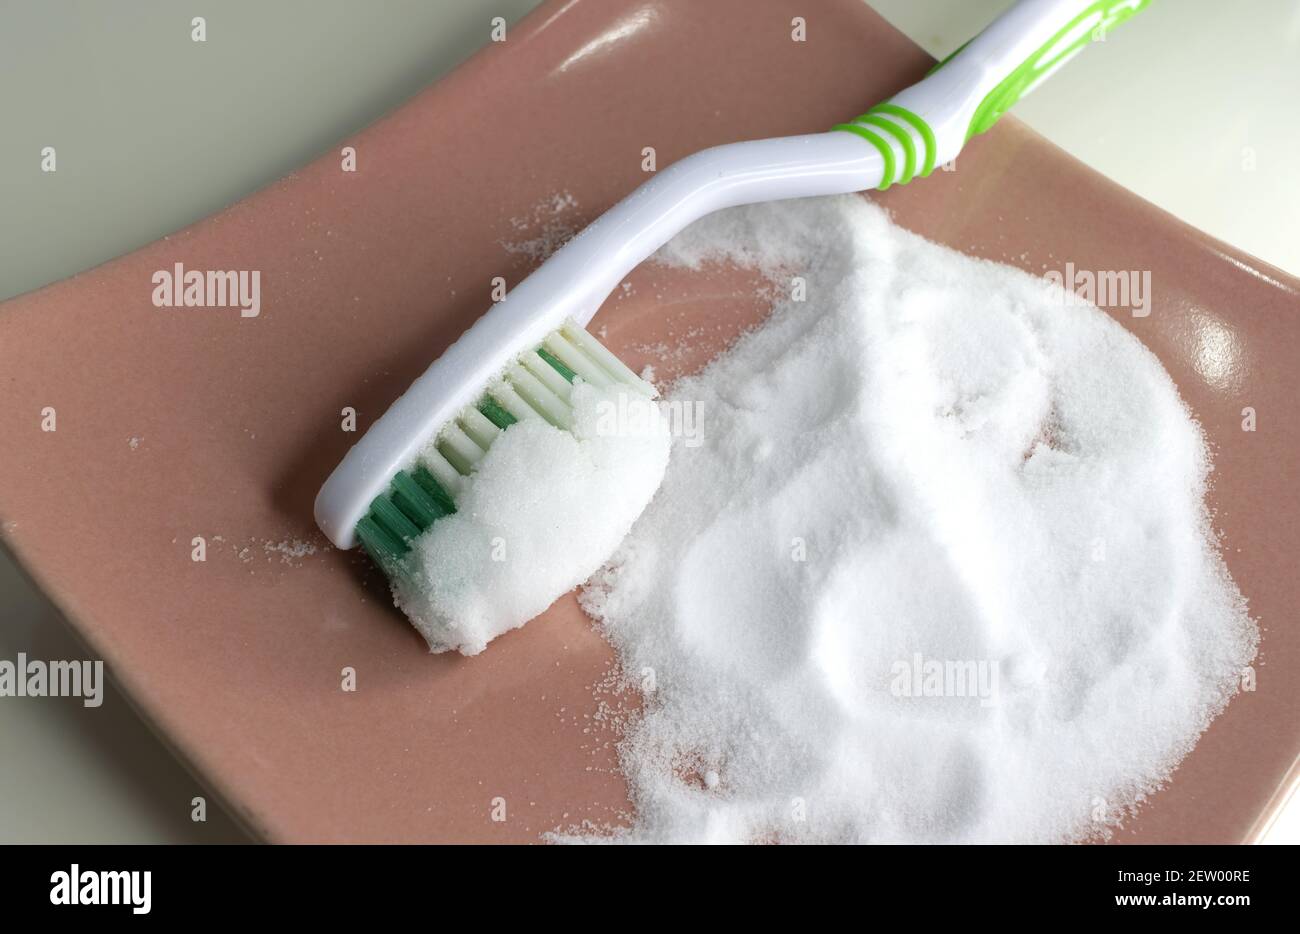 Cleaning teeth with toothbrush and baking sod Stock Photo